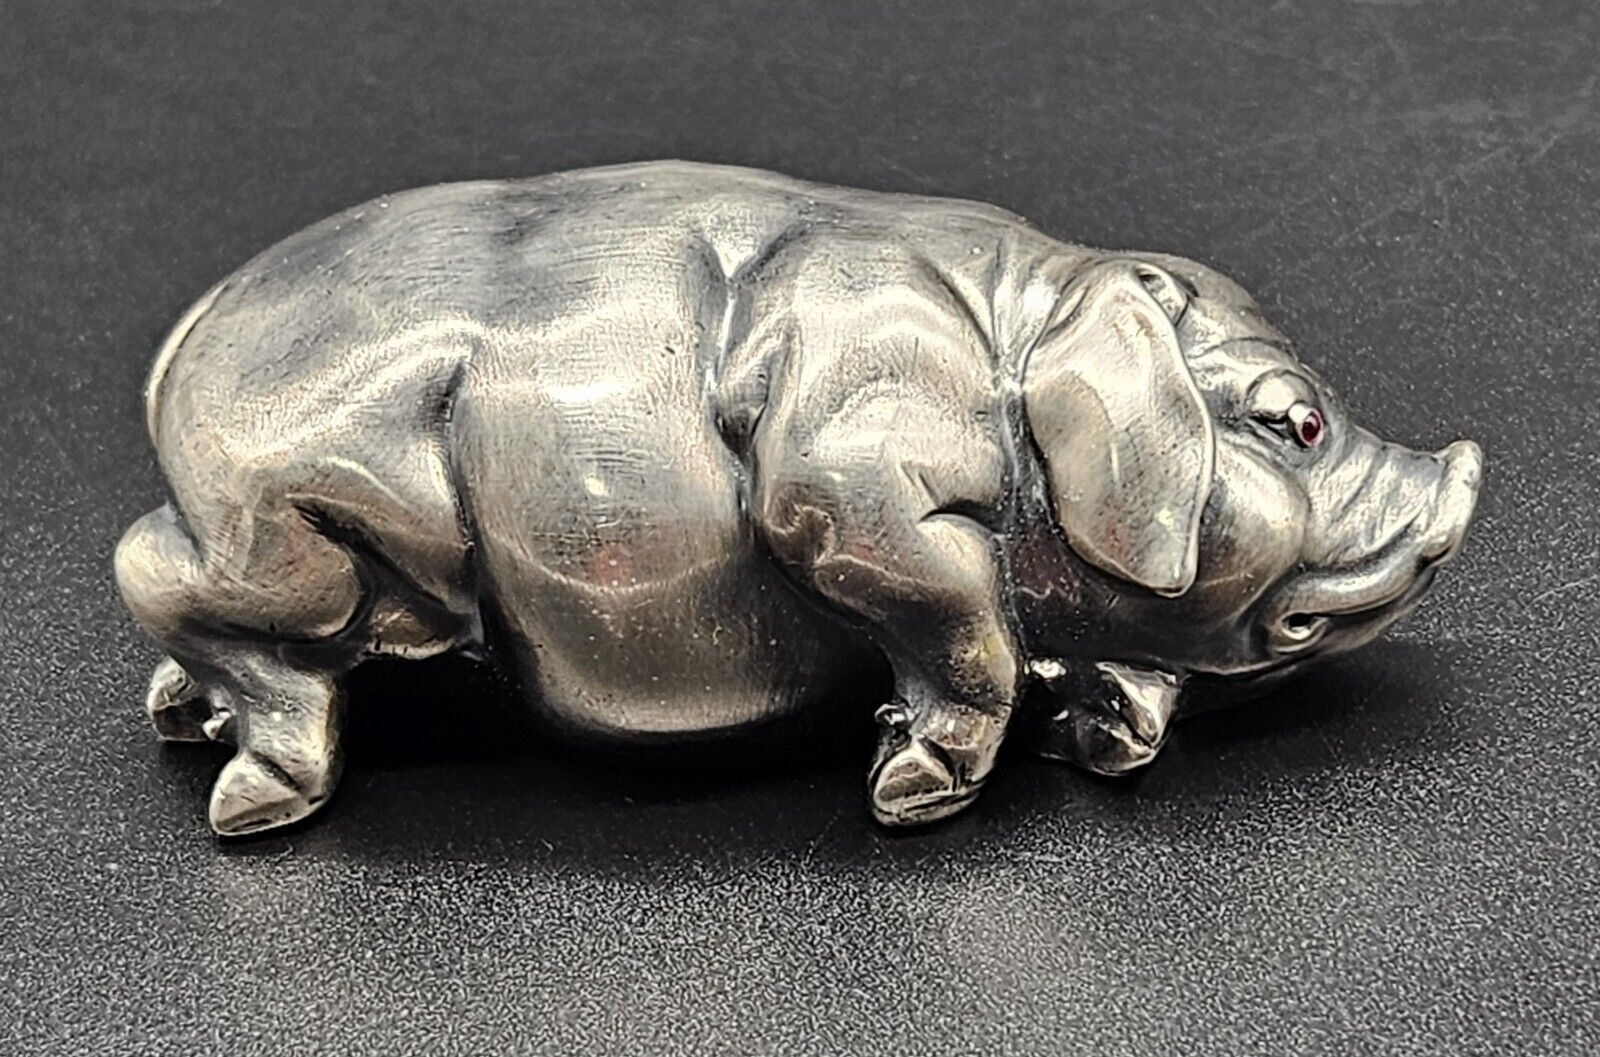 Antique Silver Lying Pig with Ruby Set Eyes by Carl Faberge Imperial Russia 1908